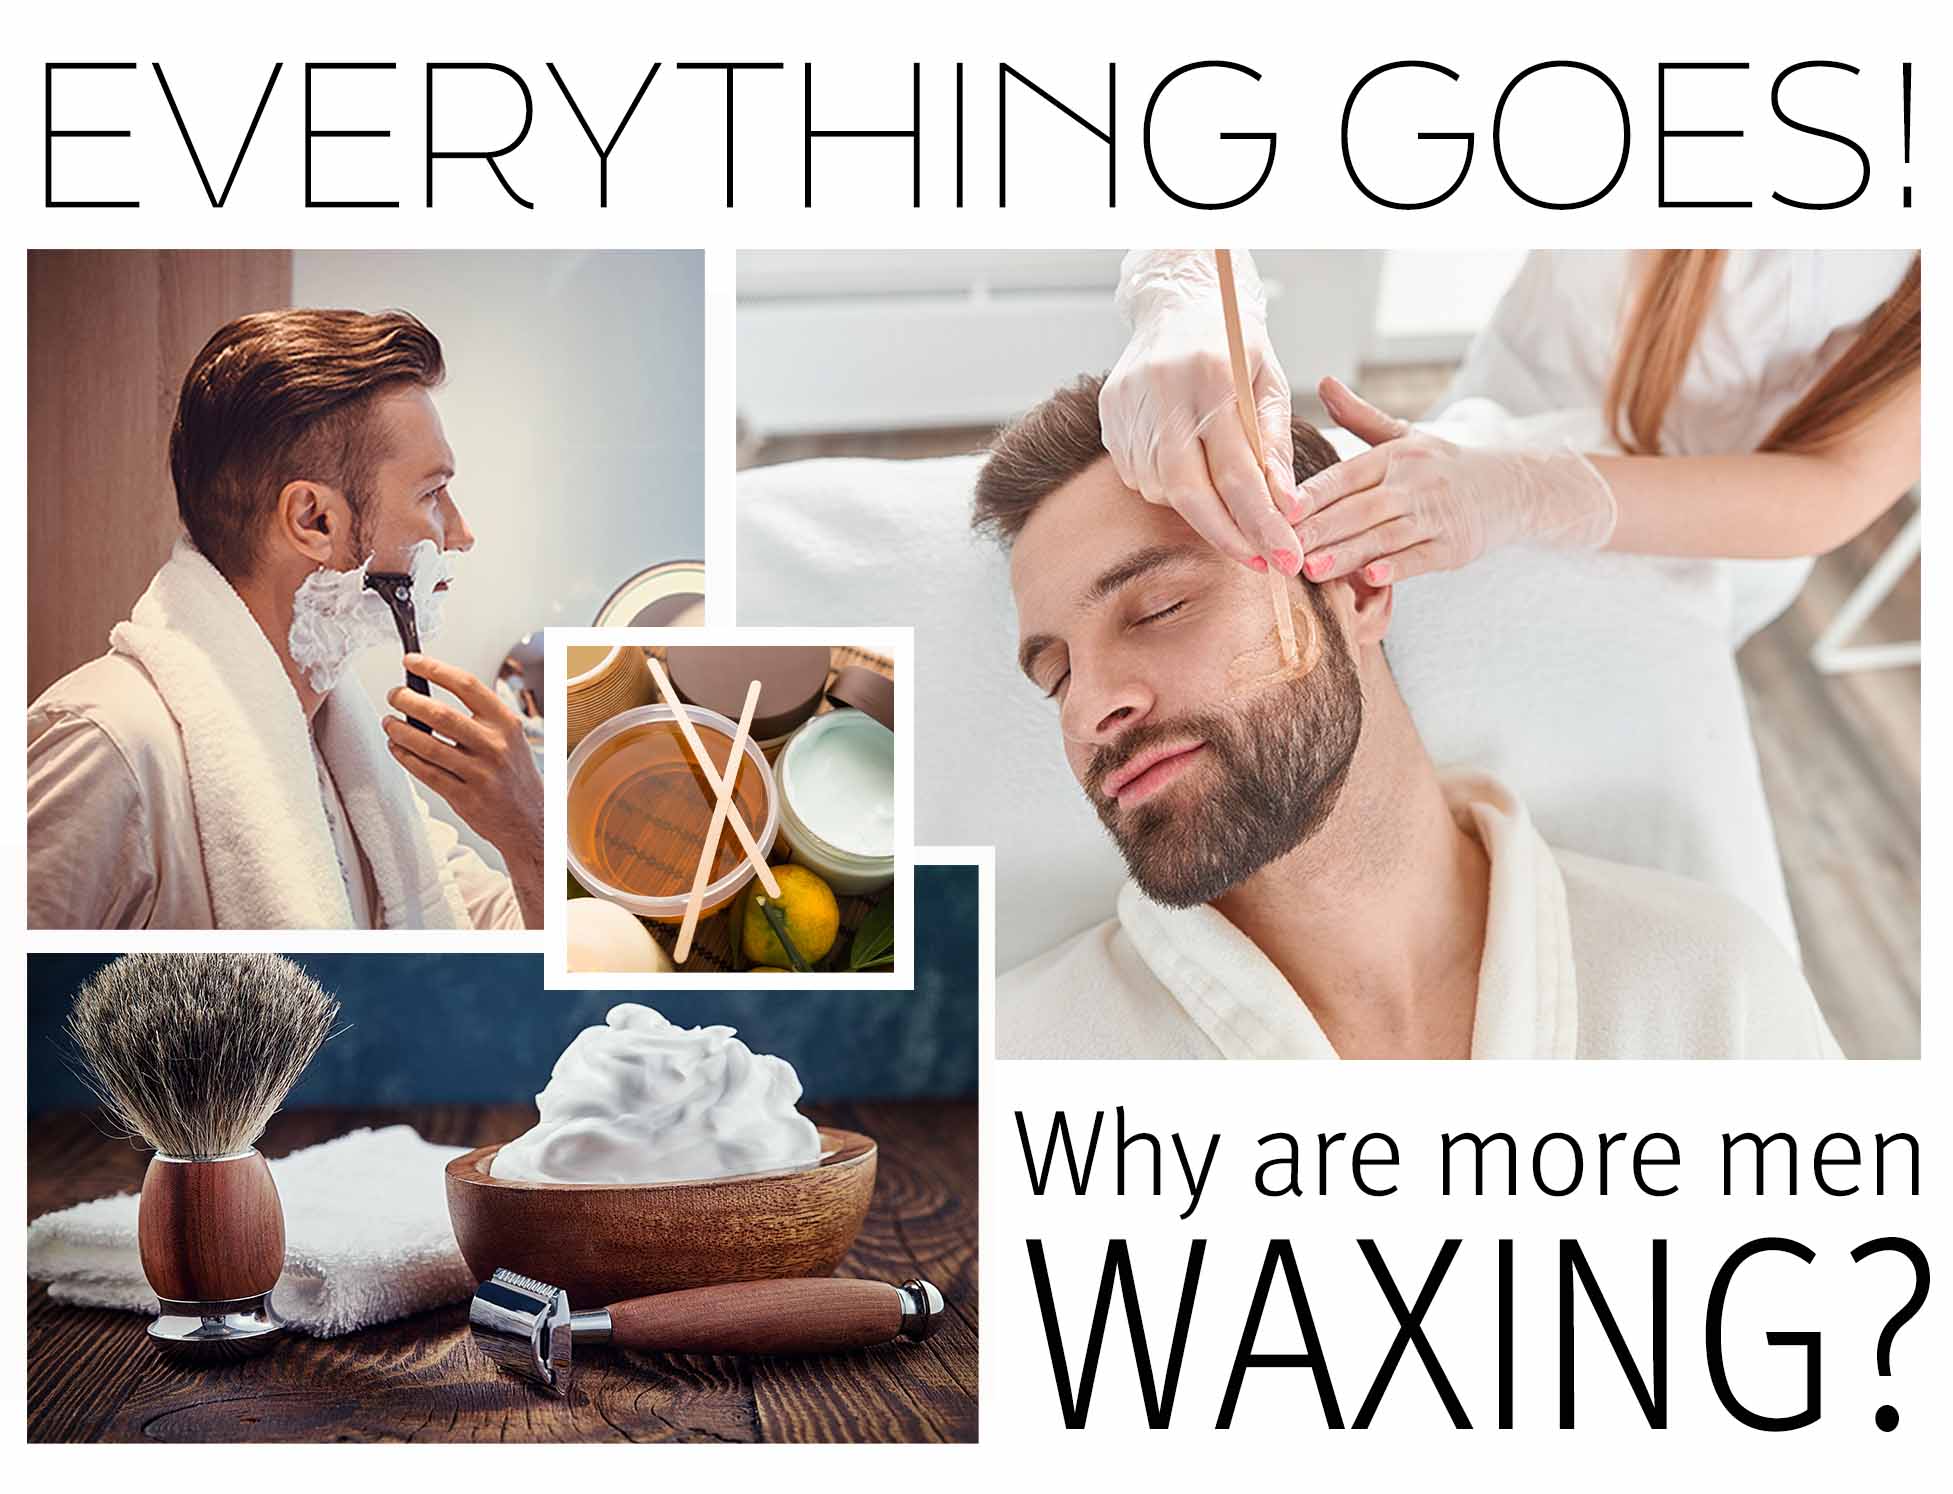 Image of a man shaving and a max waxing showing title Everything goes! Why are more men waxing?